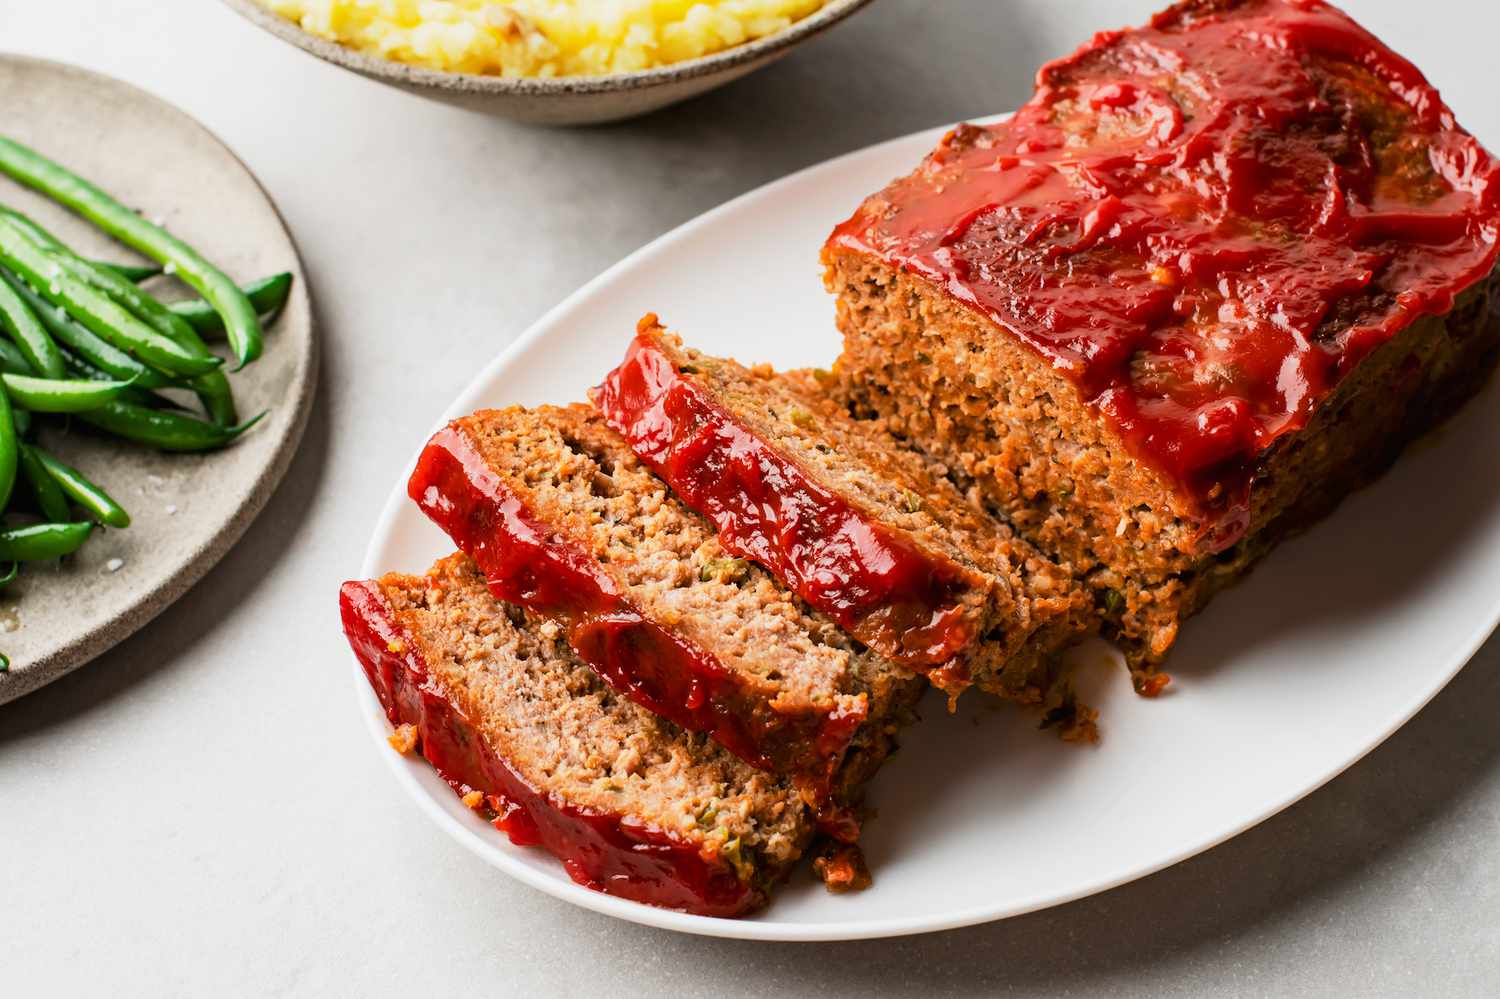 How To Store Meatloaf